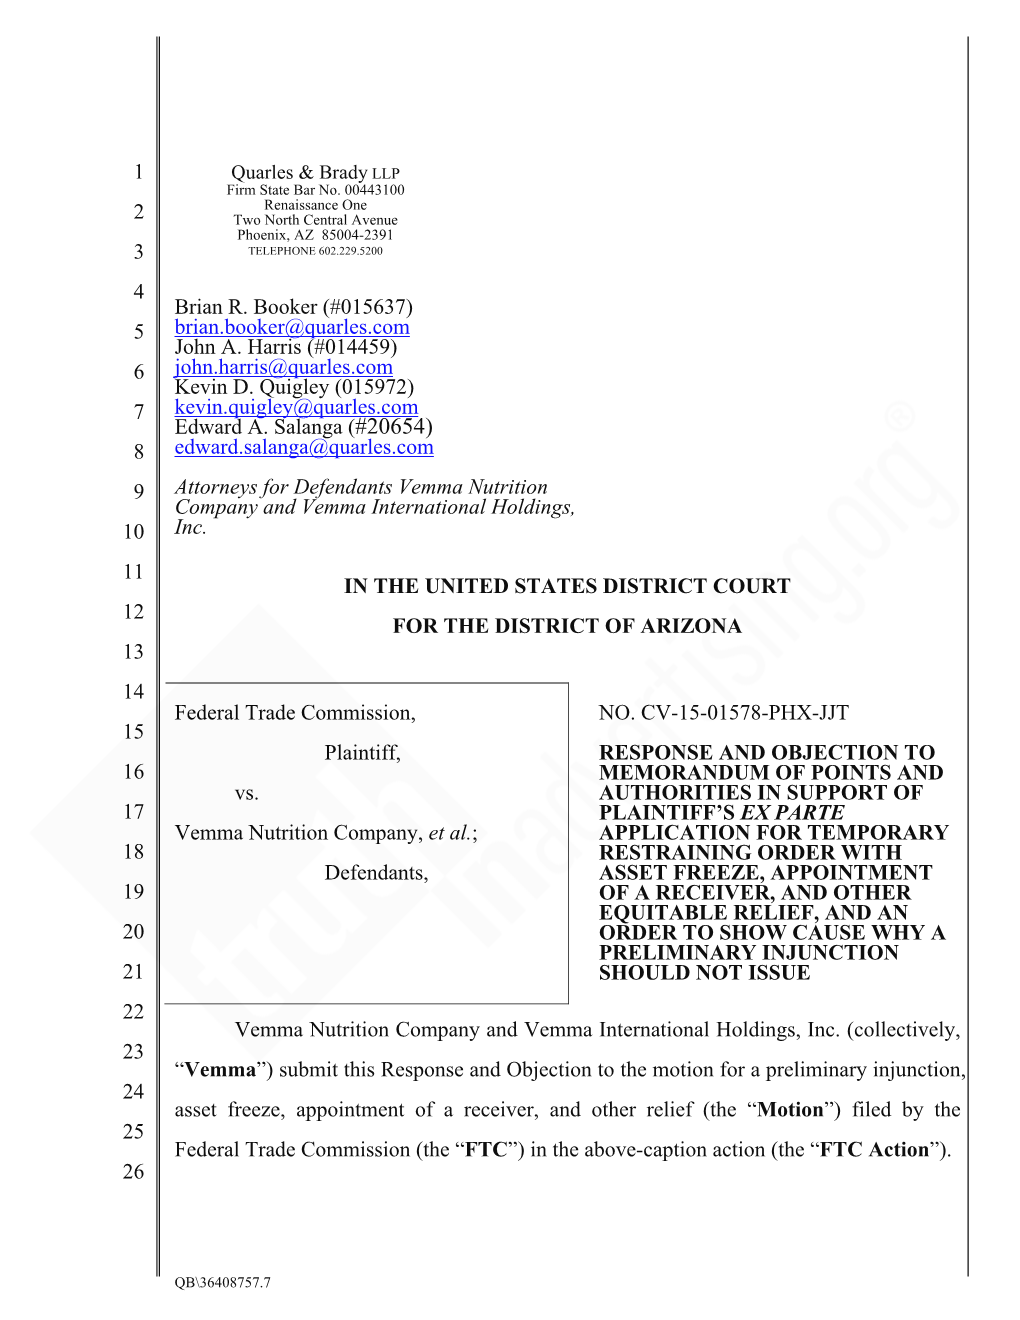 Vemma's Objection to FTC's Request for Preliminary Injunction